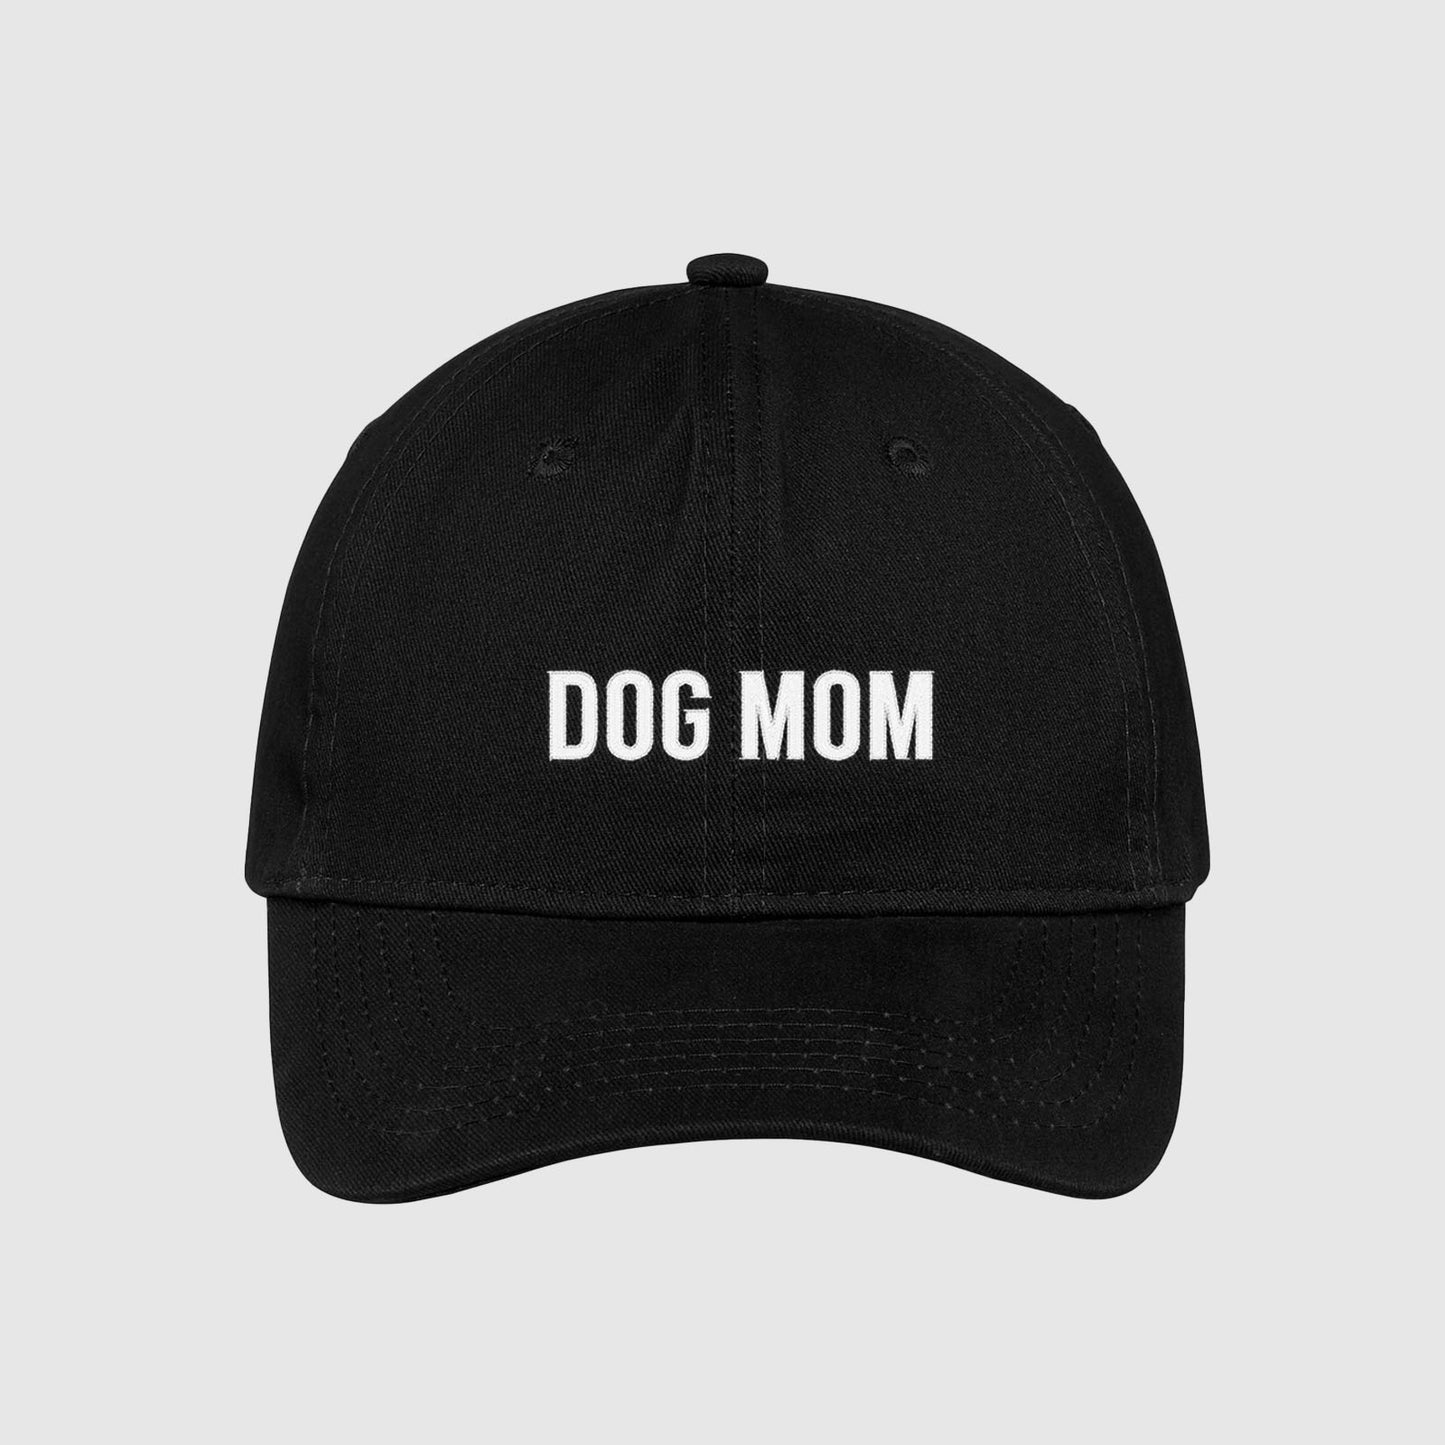 Black Dog Mom Hat embroidered with white text.